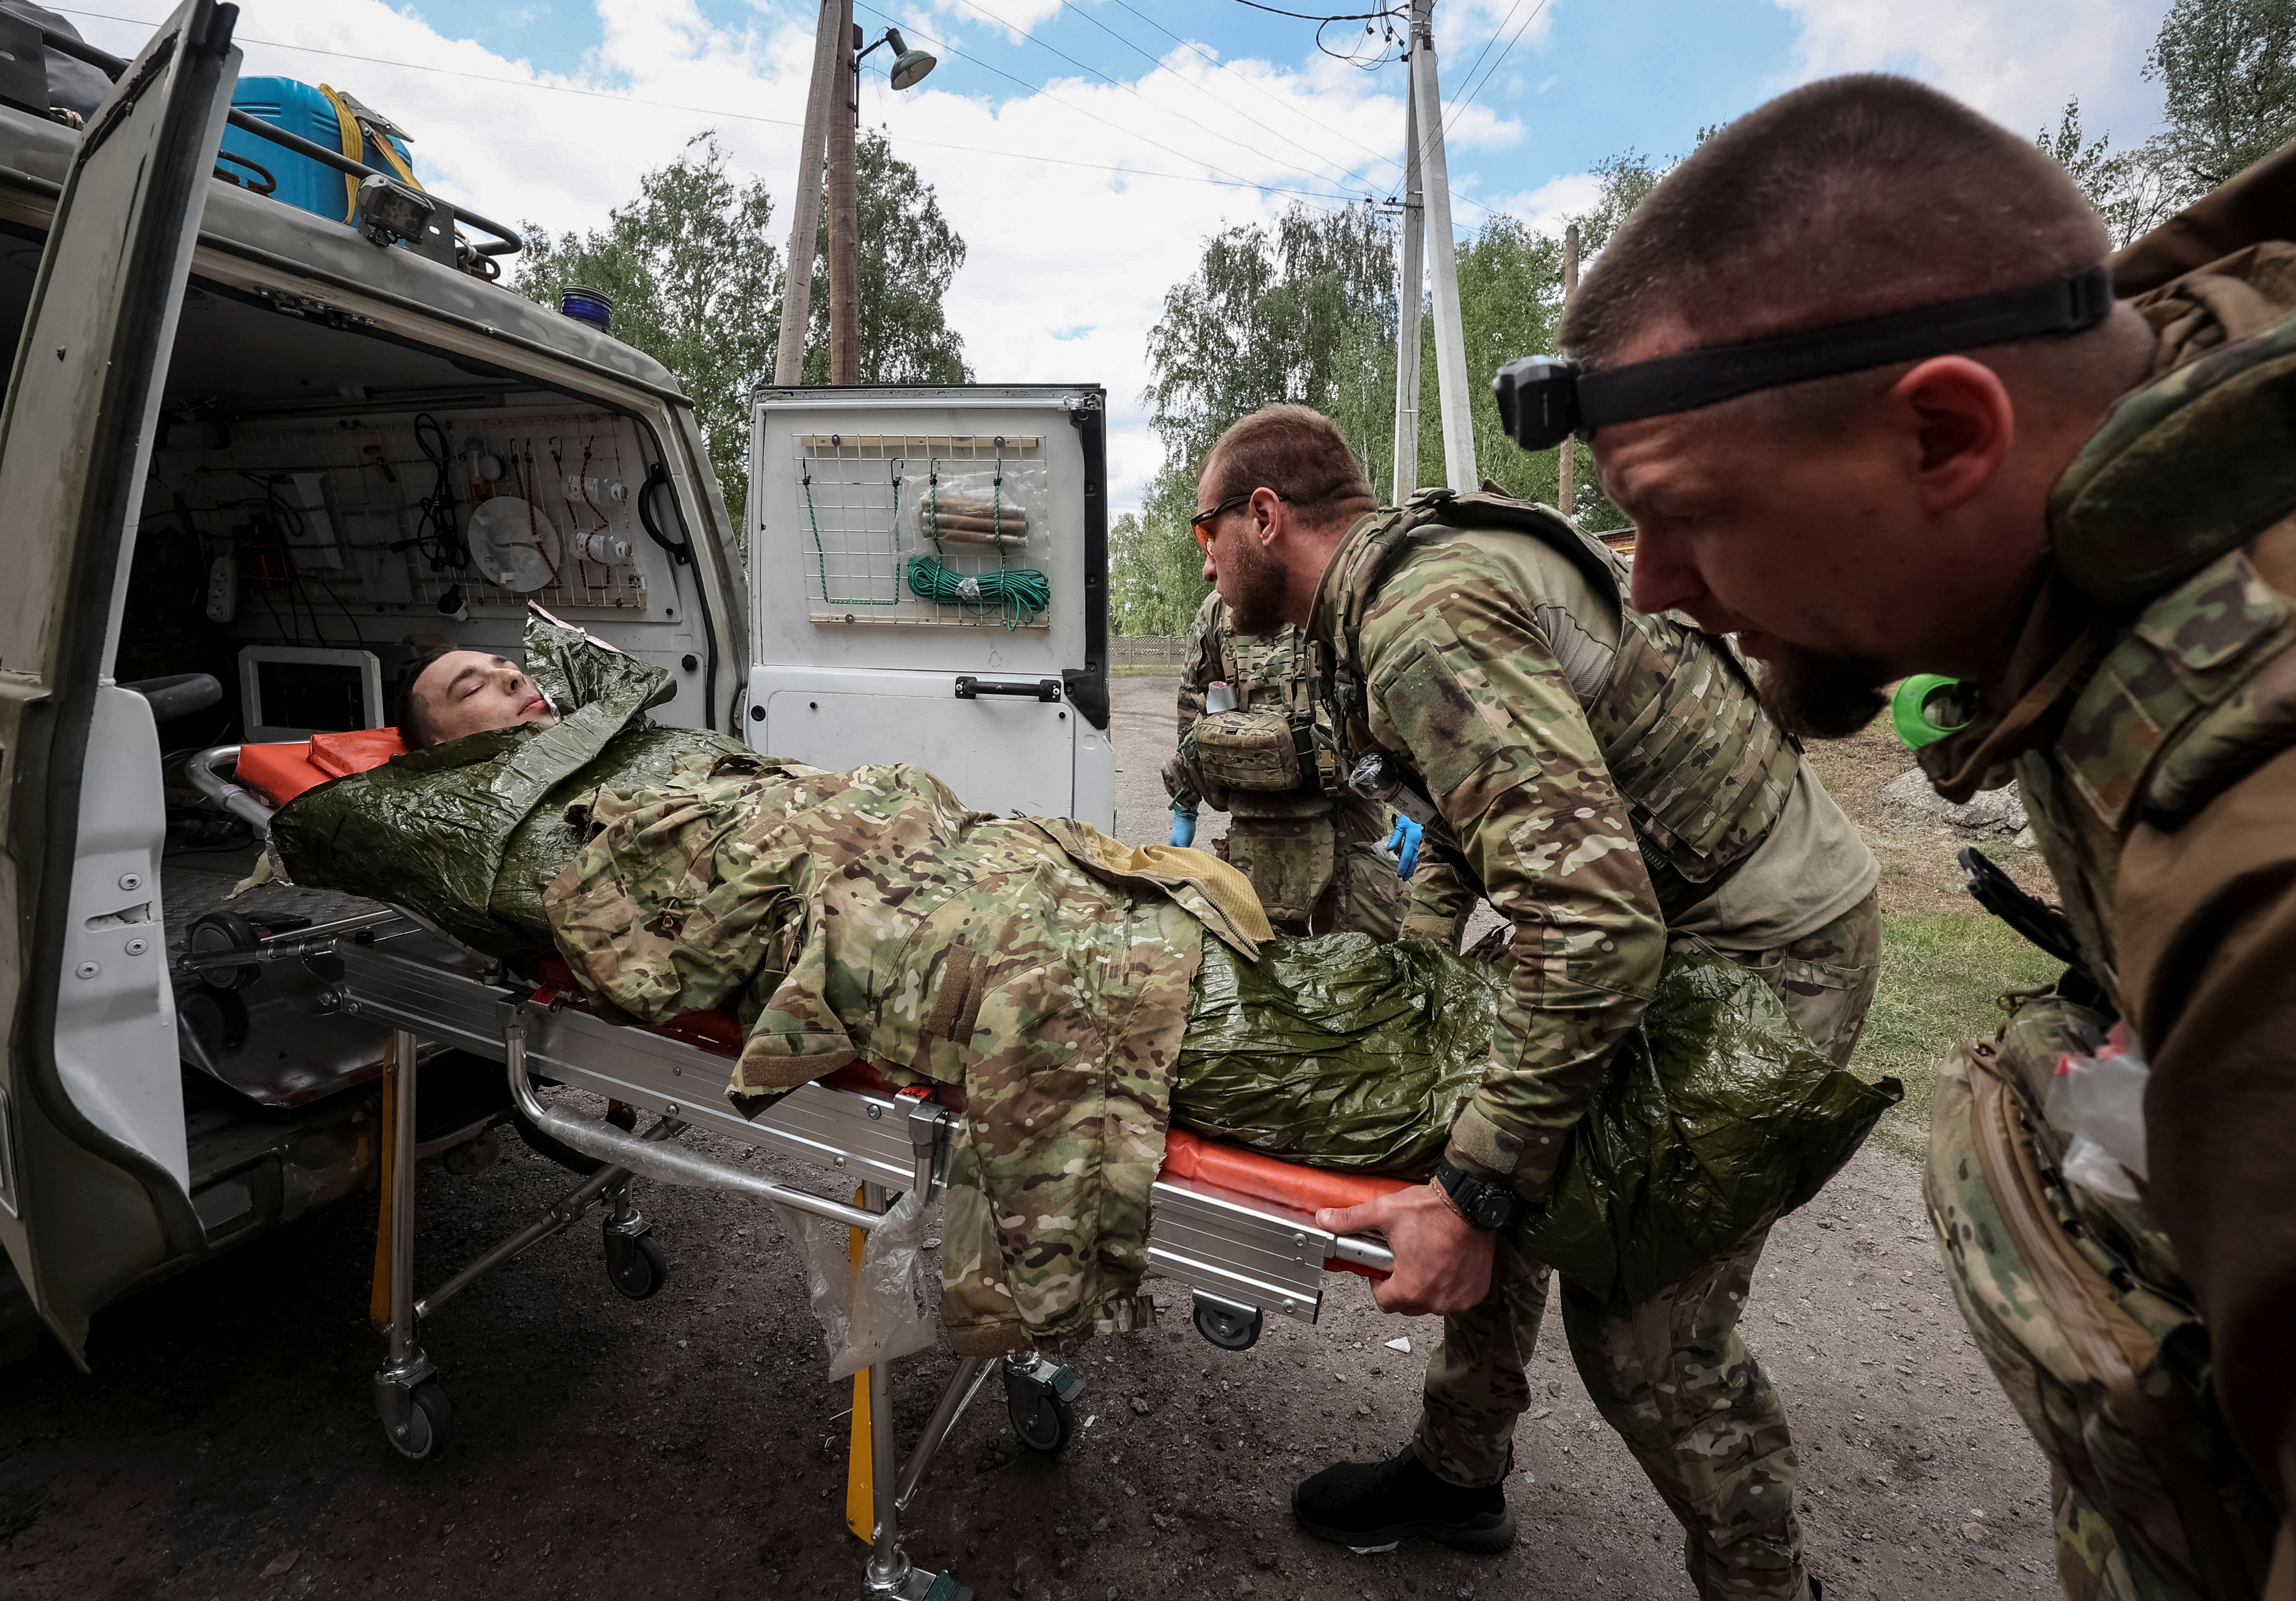 Military paramedics treat a wounded Ukrainian service member near the town of Vovchansk